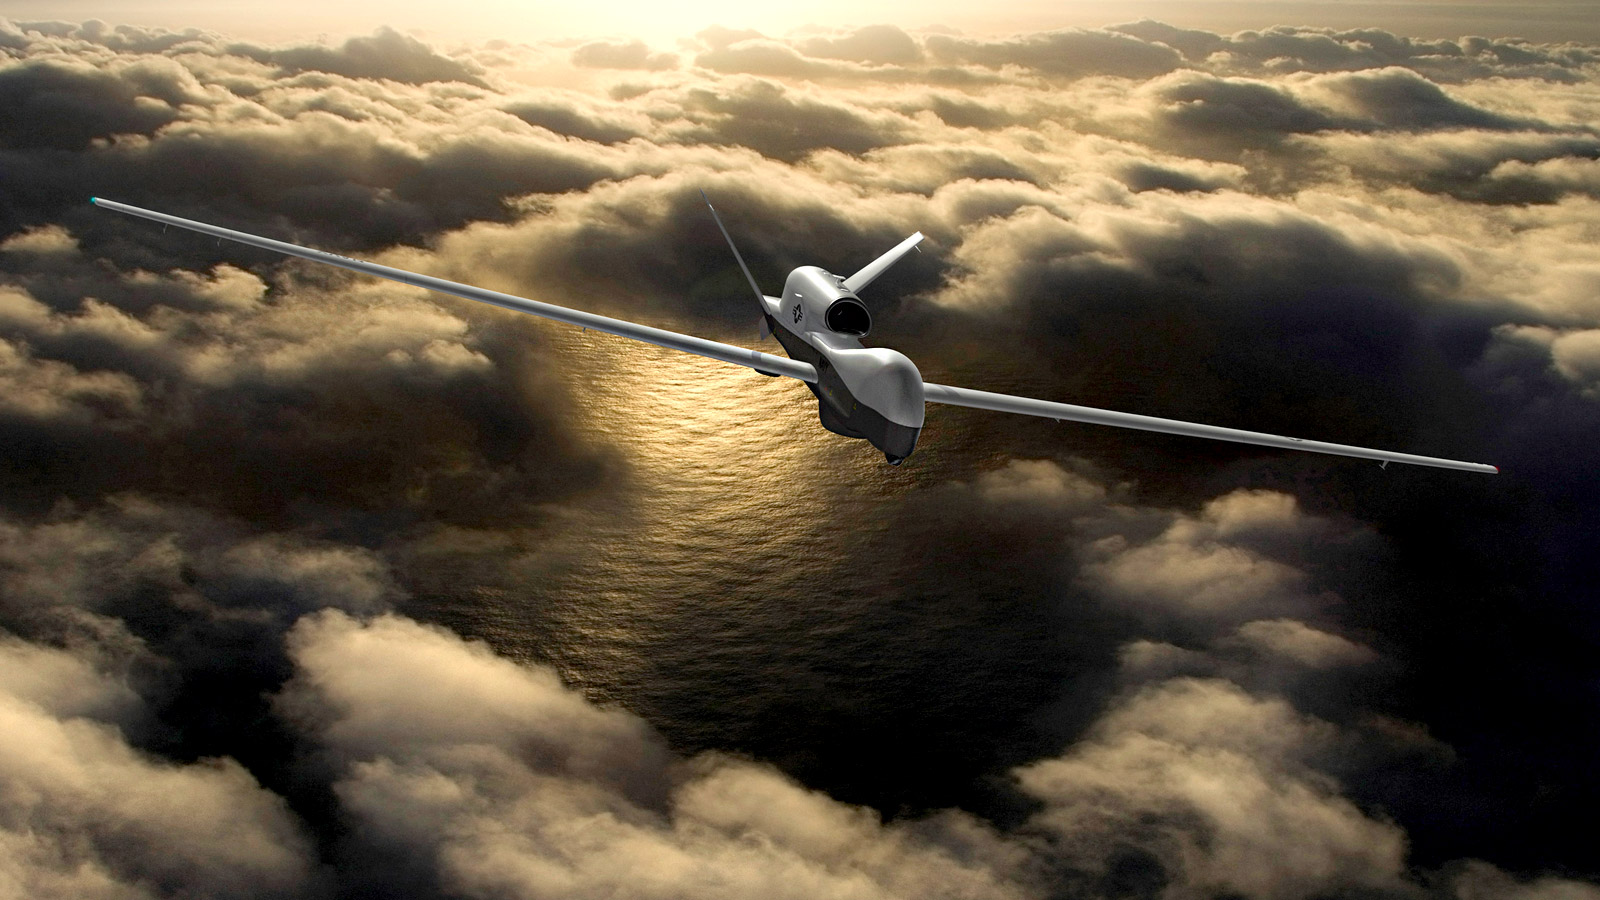 unmanned plane flying in clouds above ocean